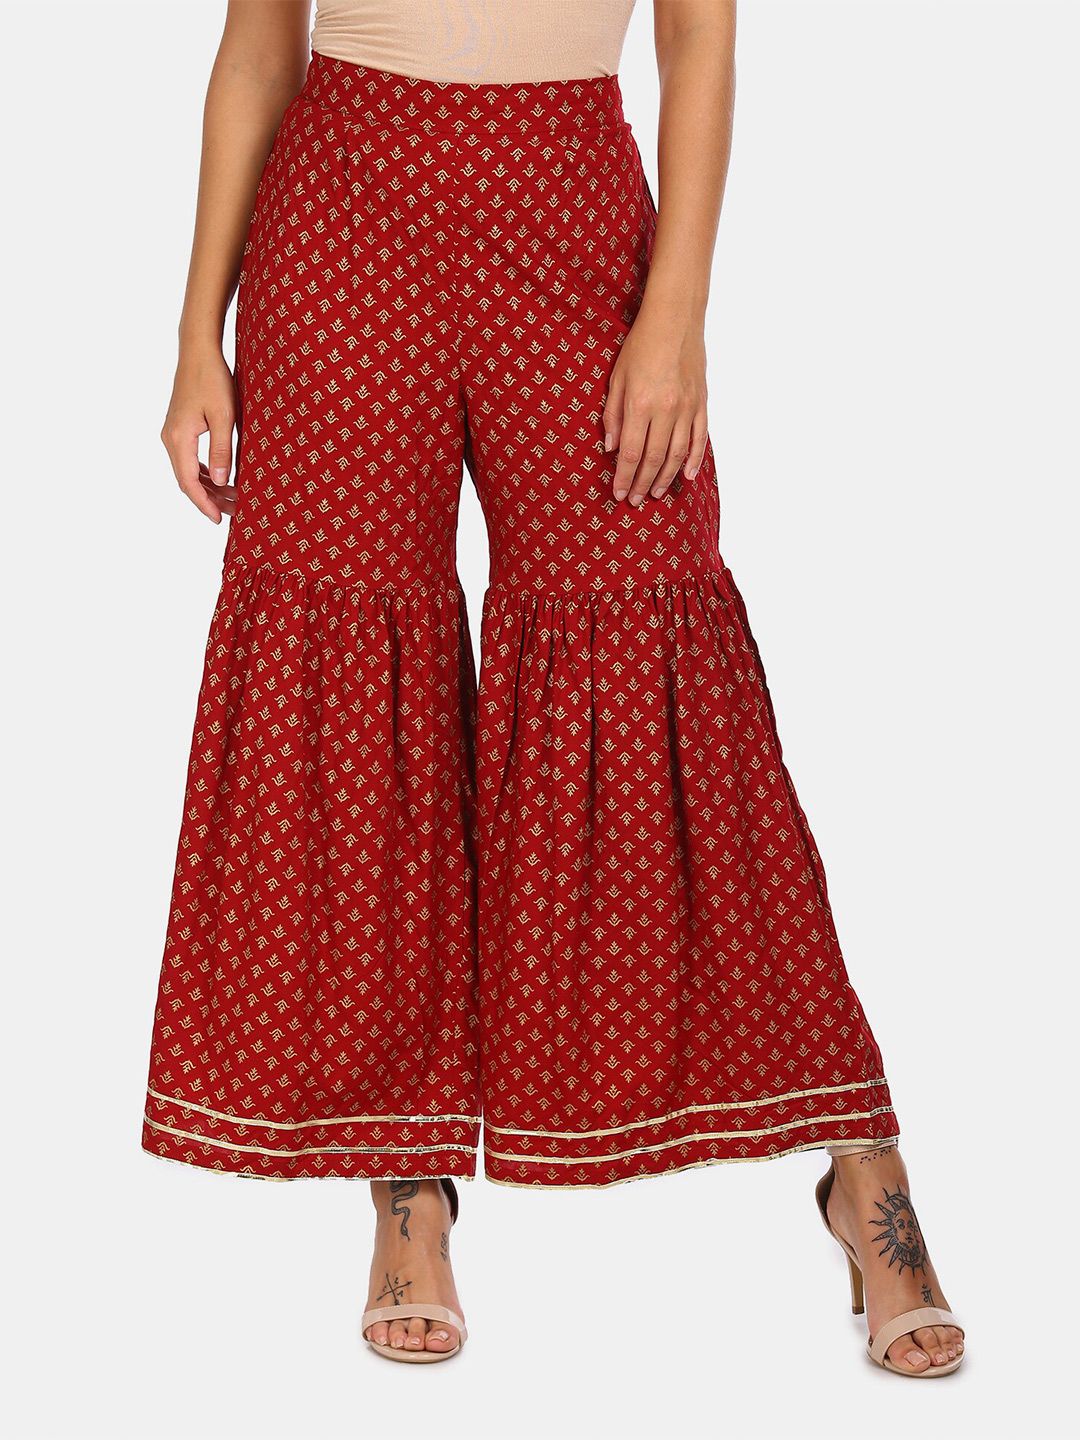 Anahi Women Maroon & Gold-Toned Printed Straight Palazzos Price in India